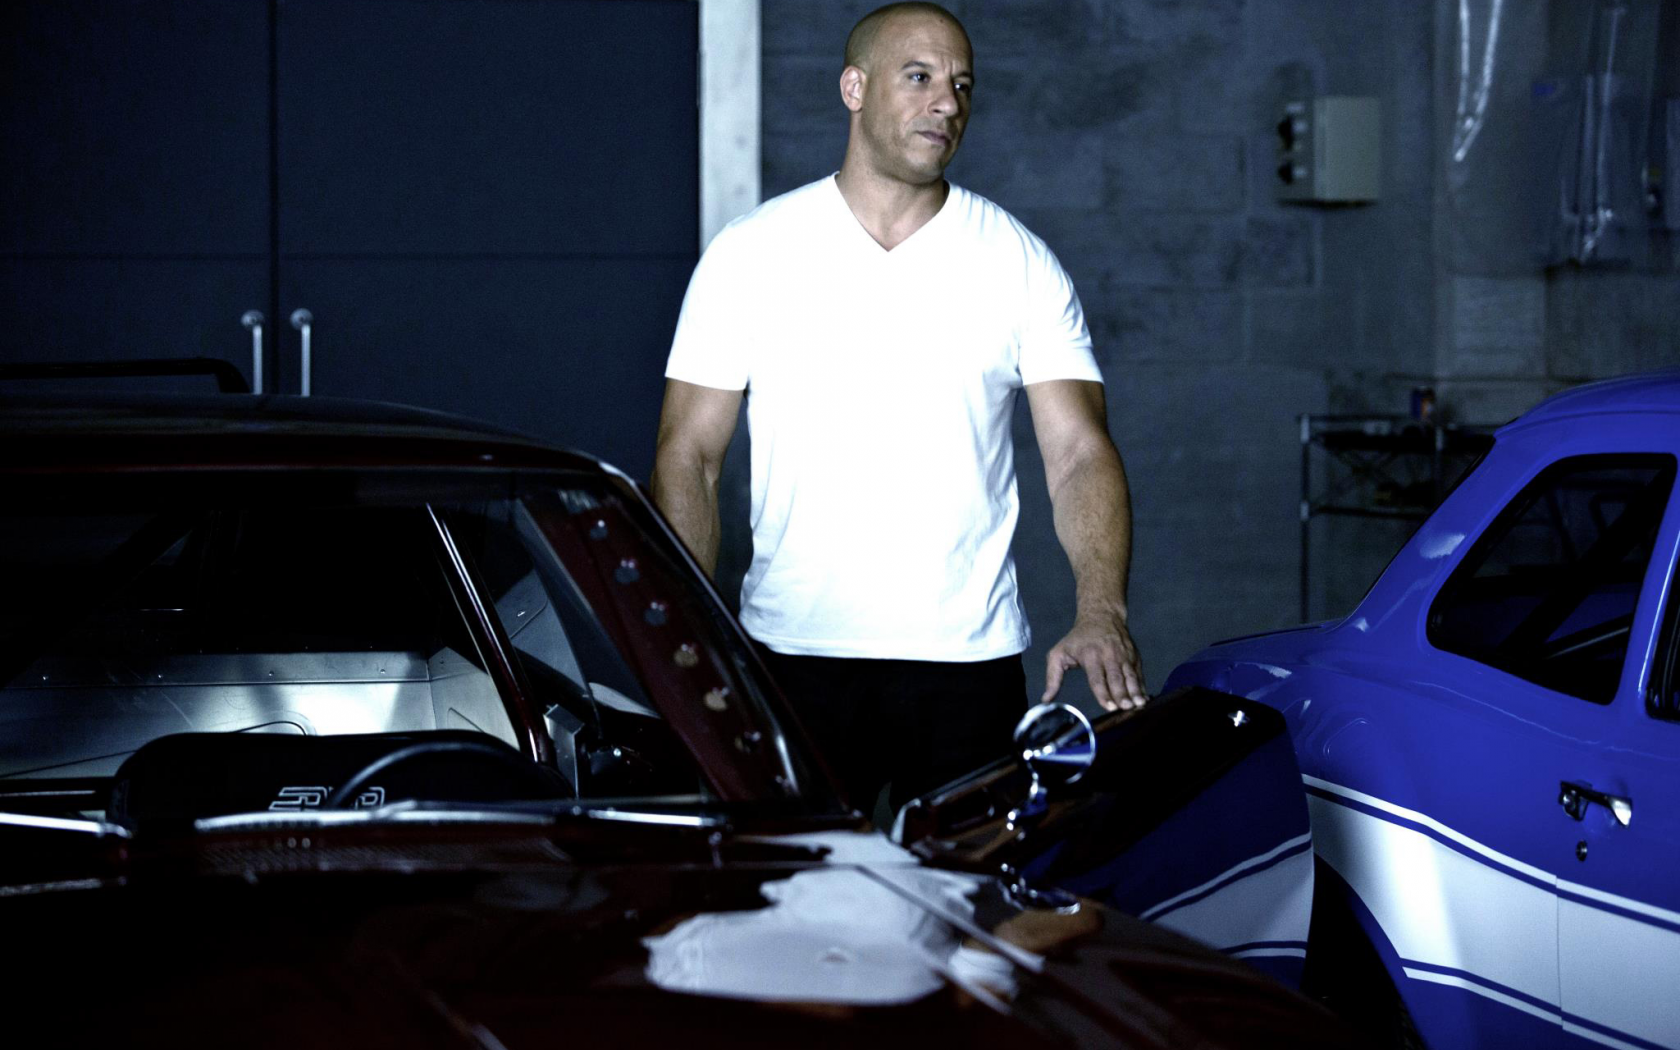 the fast and the furious 6, dominic toretto, вин дизель, Форсаж 6, vin diesel